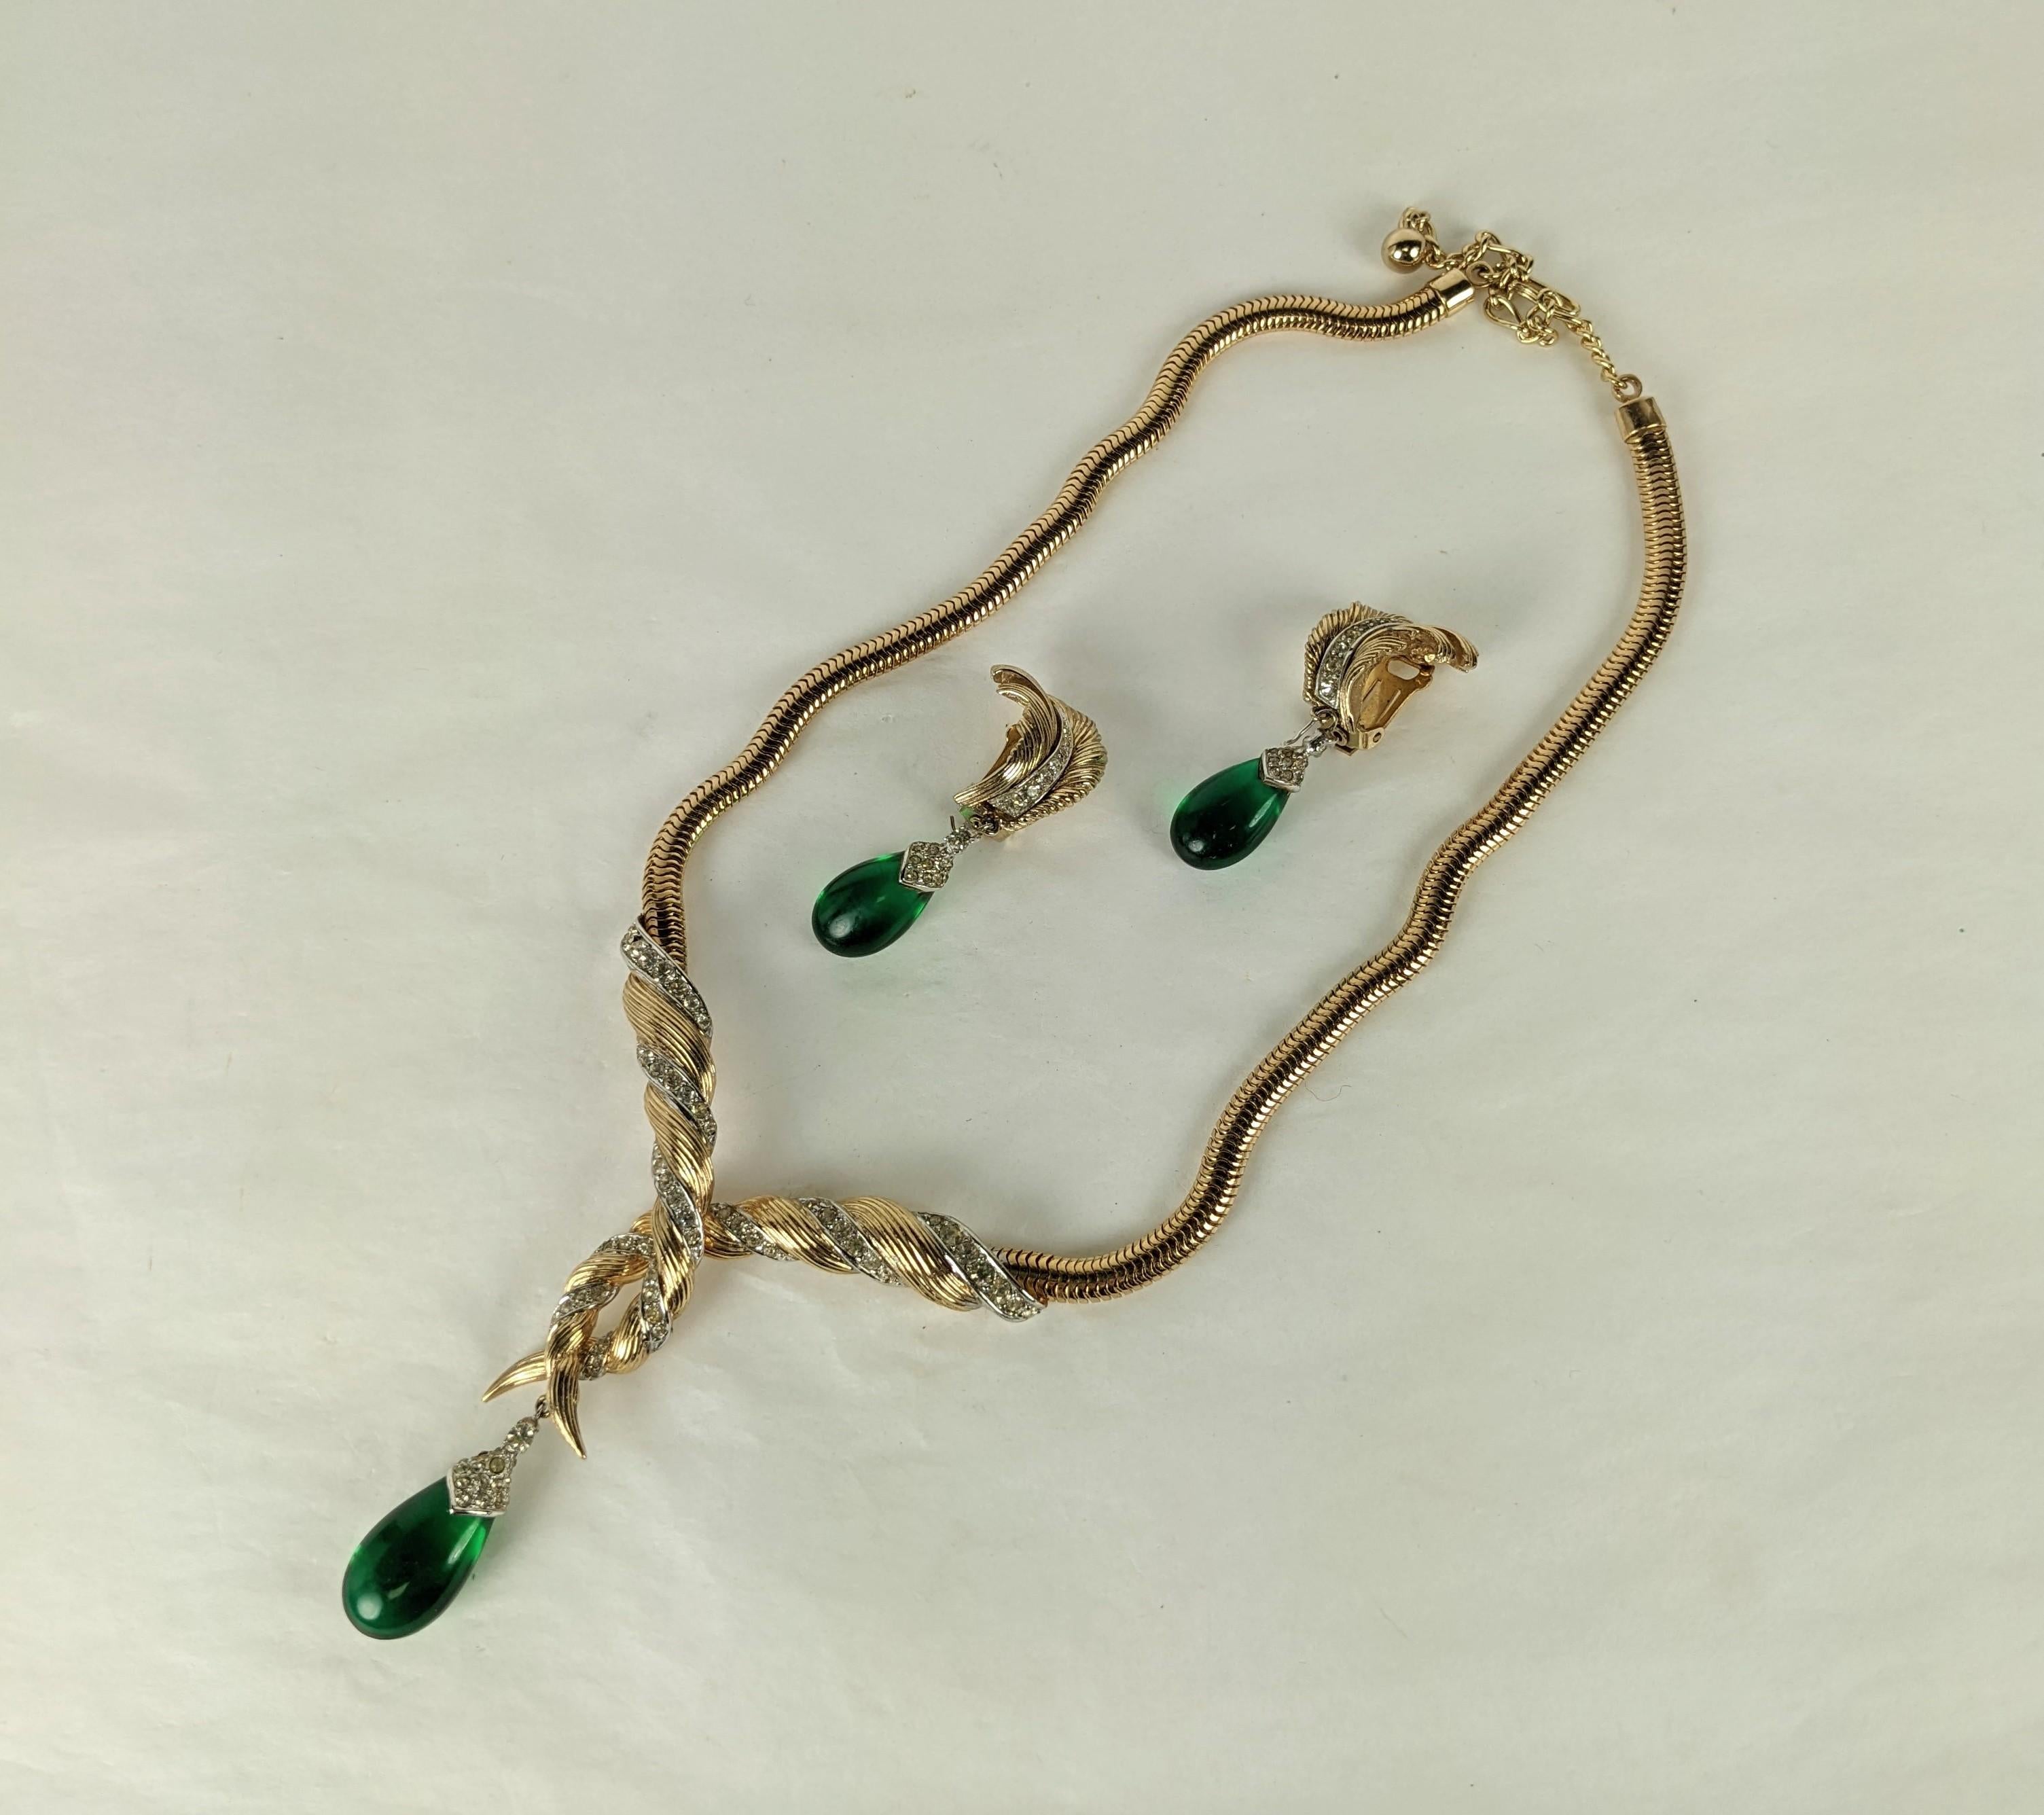 Attractive Marcel Boucher Gilt Pave Emerald Drop Necklace and Earrings from the 1950's. Lovely retro style design has matching clip earrings with a feather motif.  Central crossover motif is hinged for comfort.  All pieces signed Boucher.  1950's